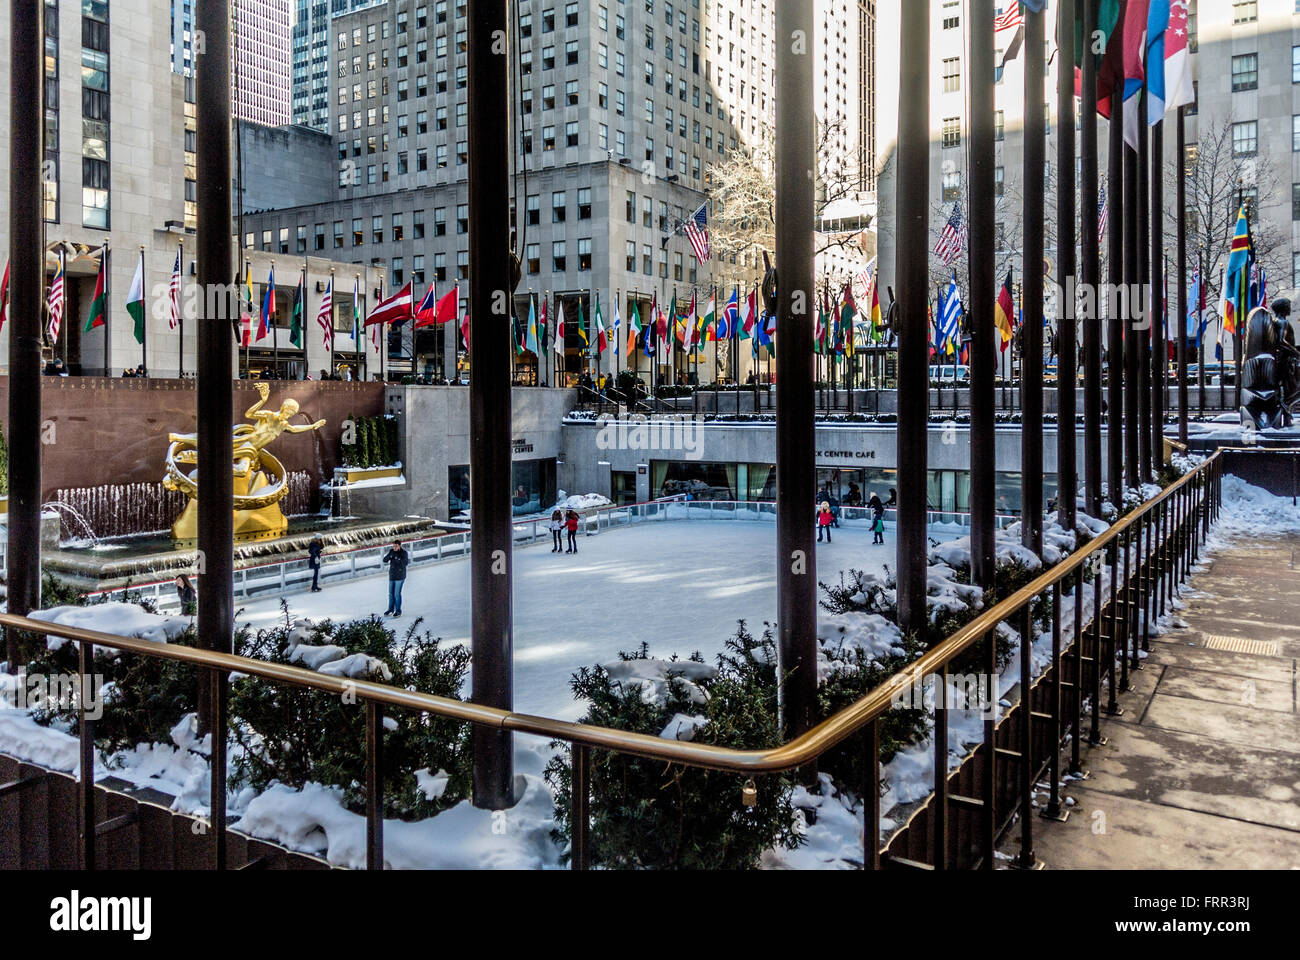 Ice Skating at The Concourse - part of the Rockefeller Center, New York City, USA. Stock Photo